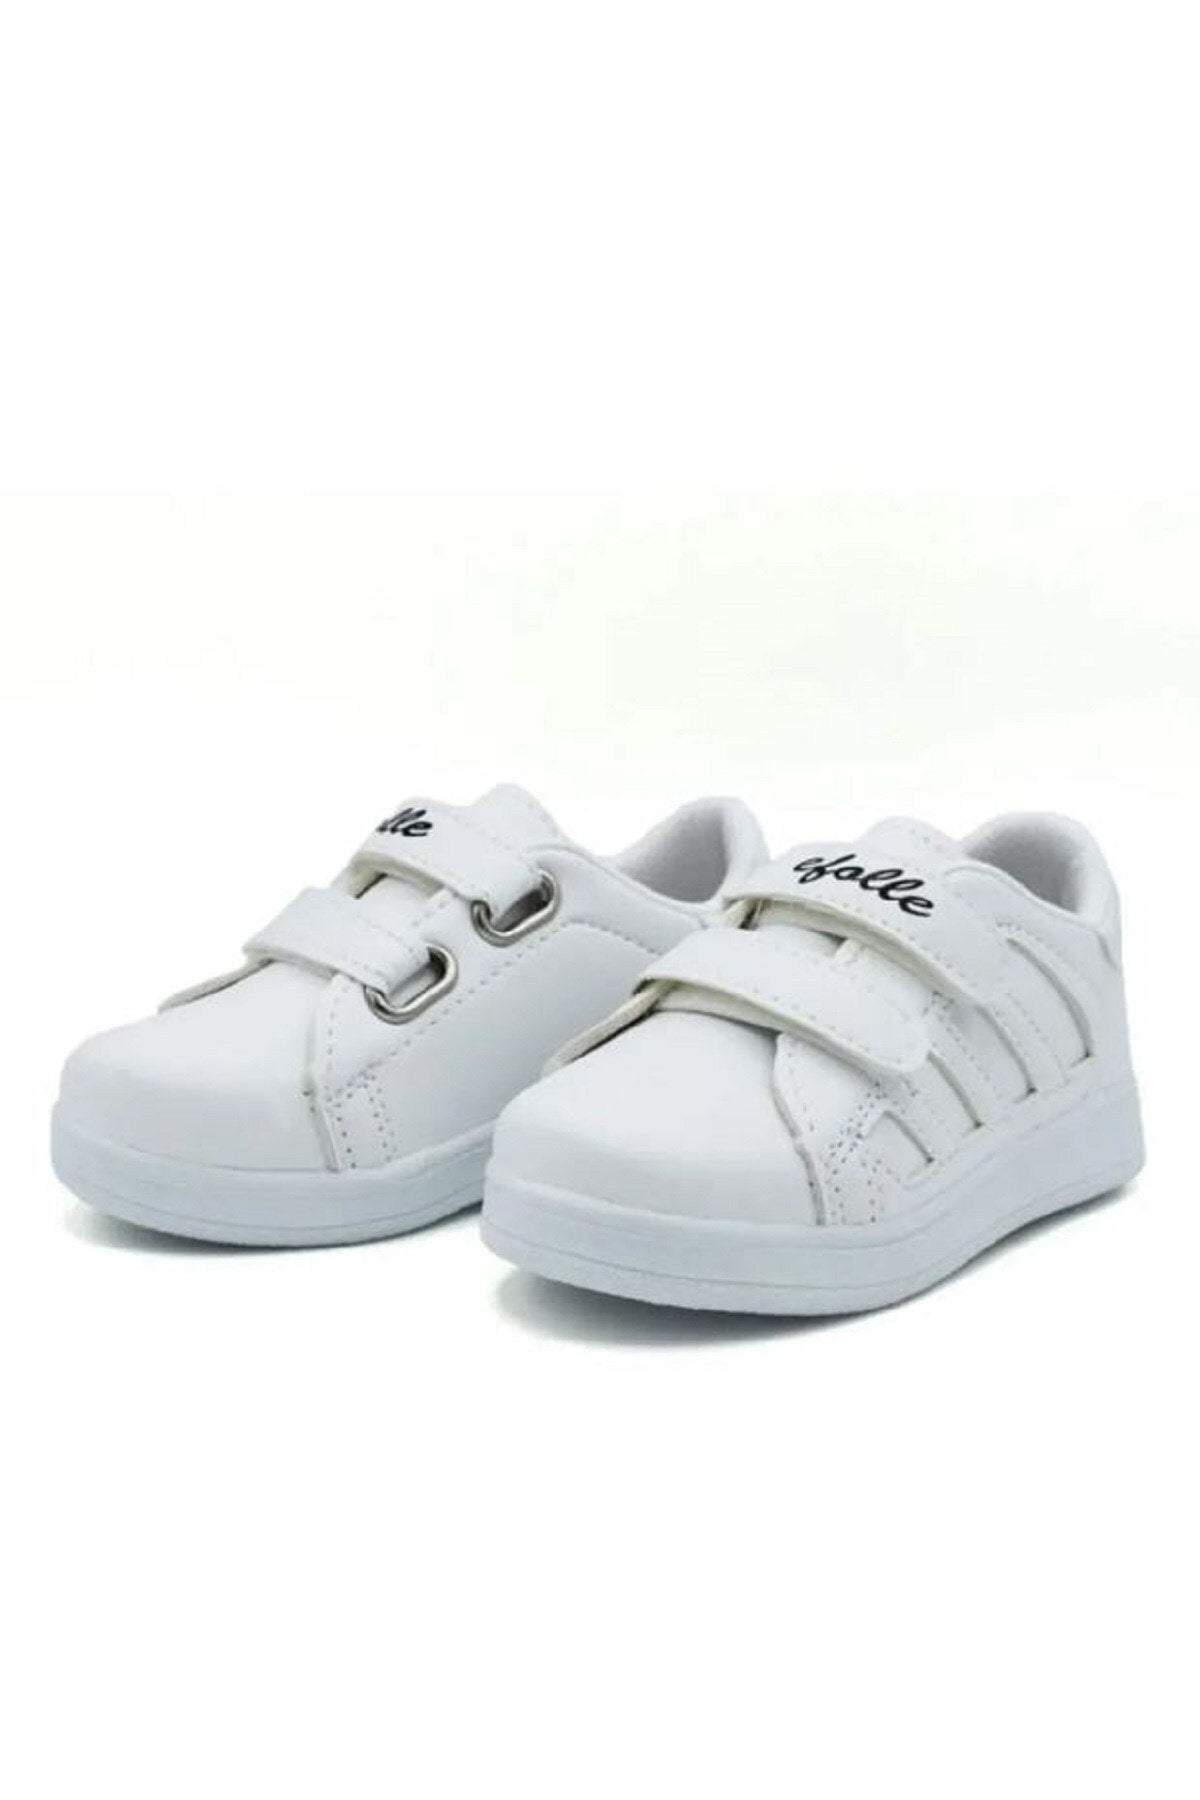 DAILY WHITE GIRLS BOY BABY BABY SMEaker Double Call Sneakers 2 4 Band Libra 1002